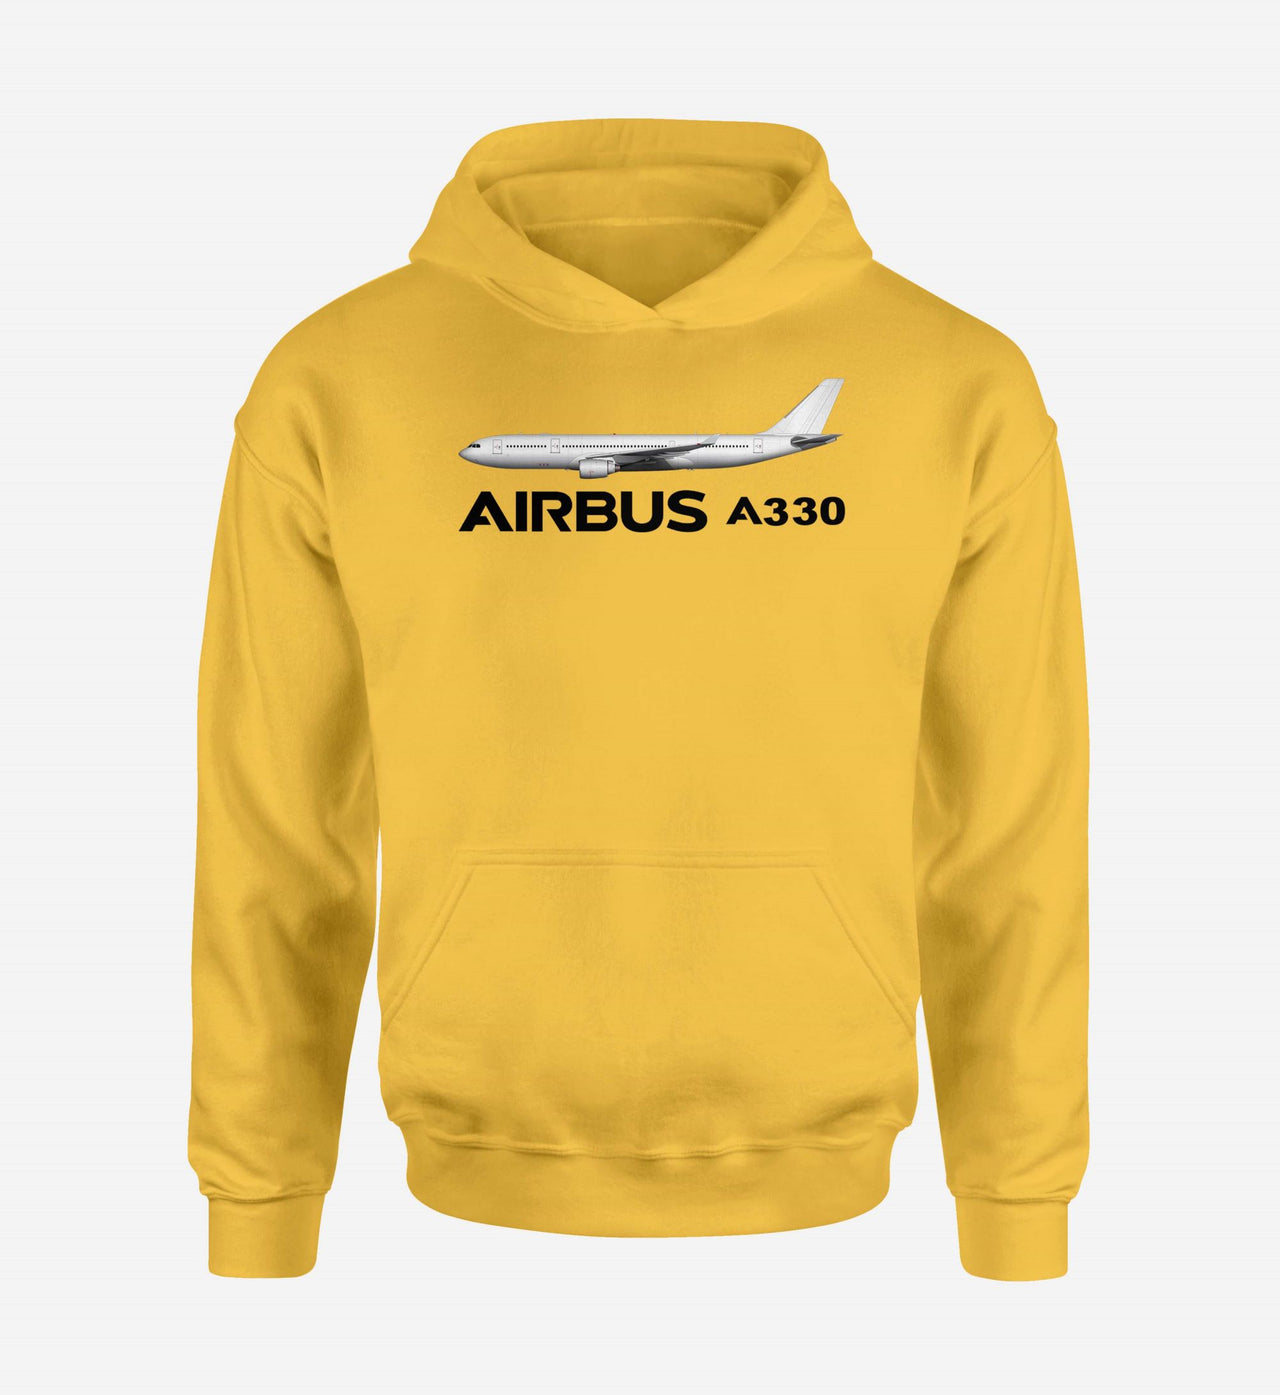 The Airbus A330 Designed Hoodies